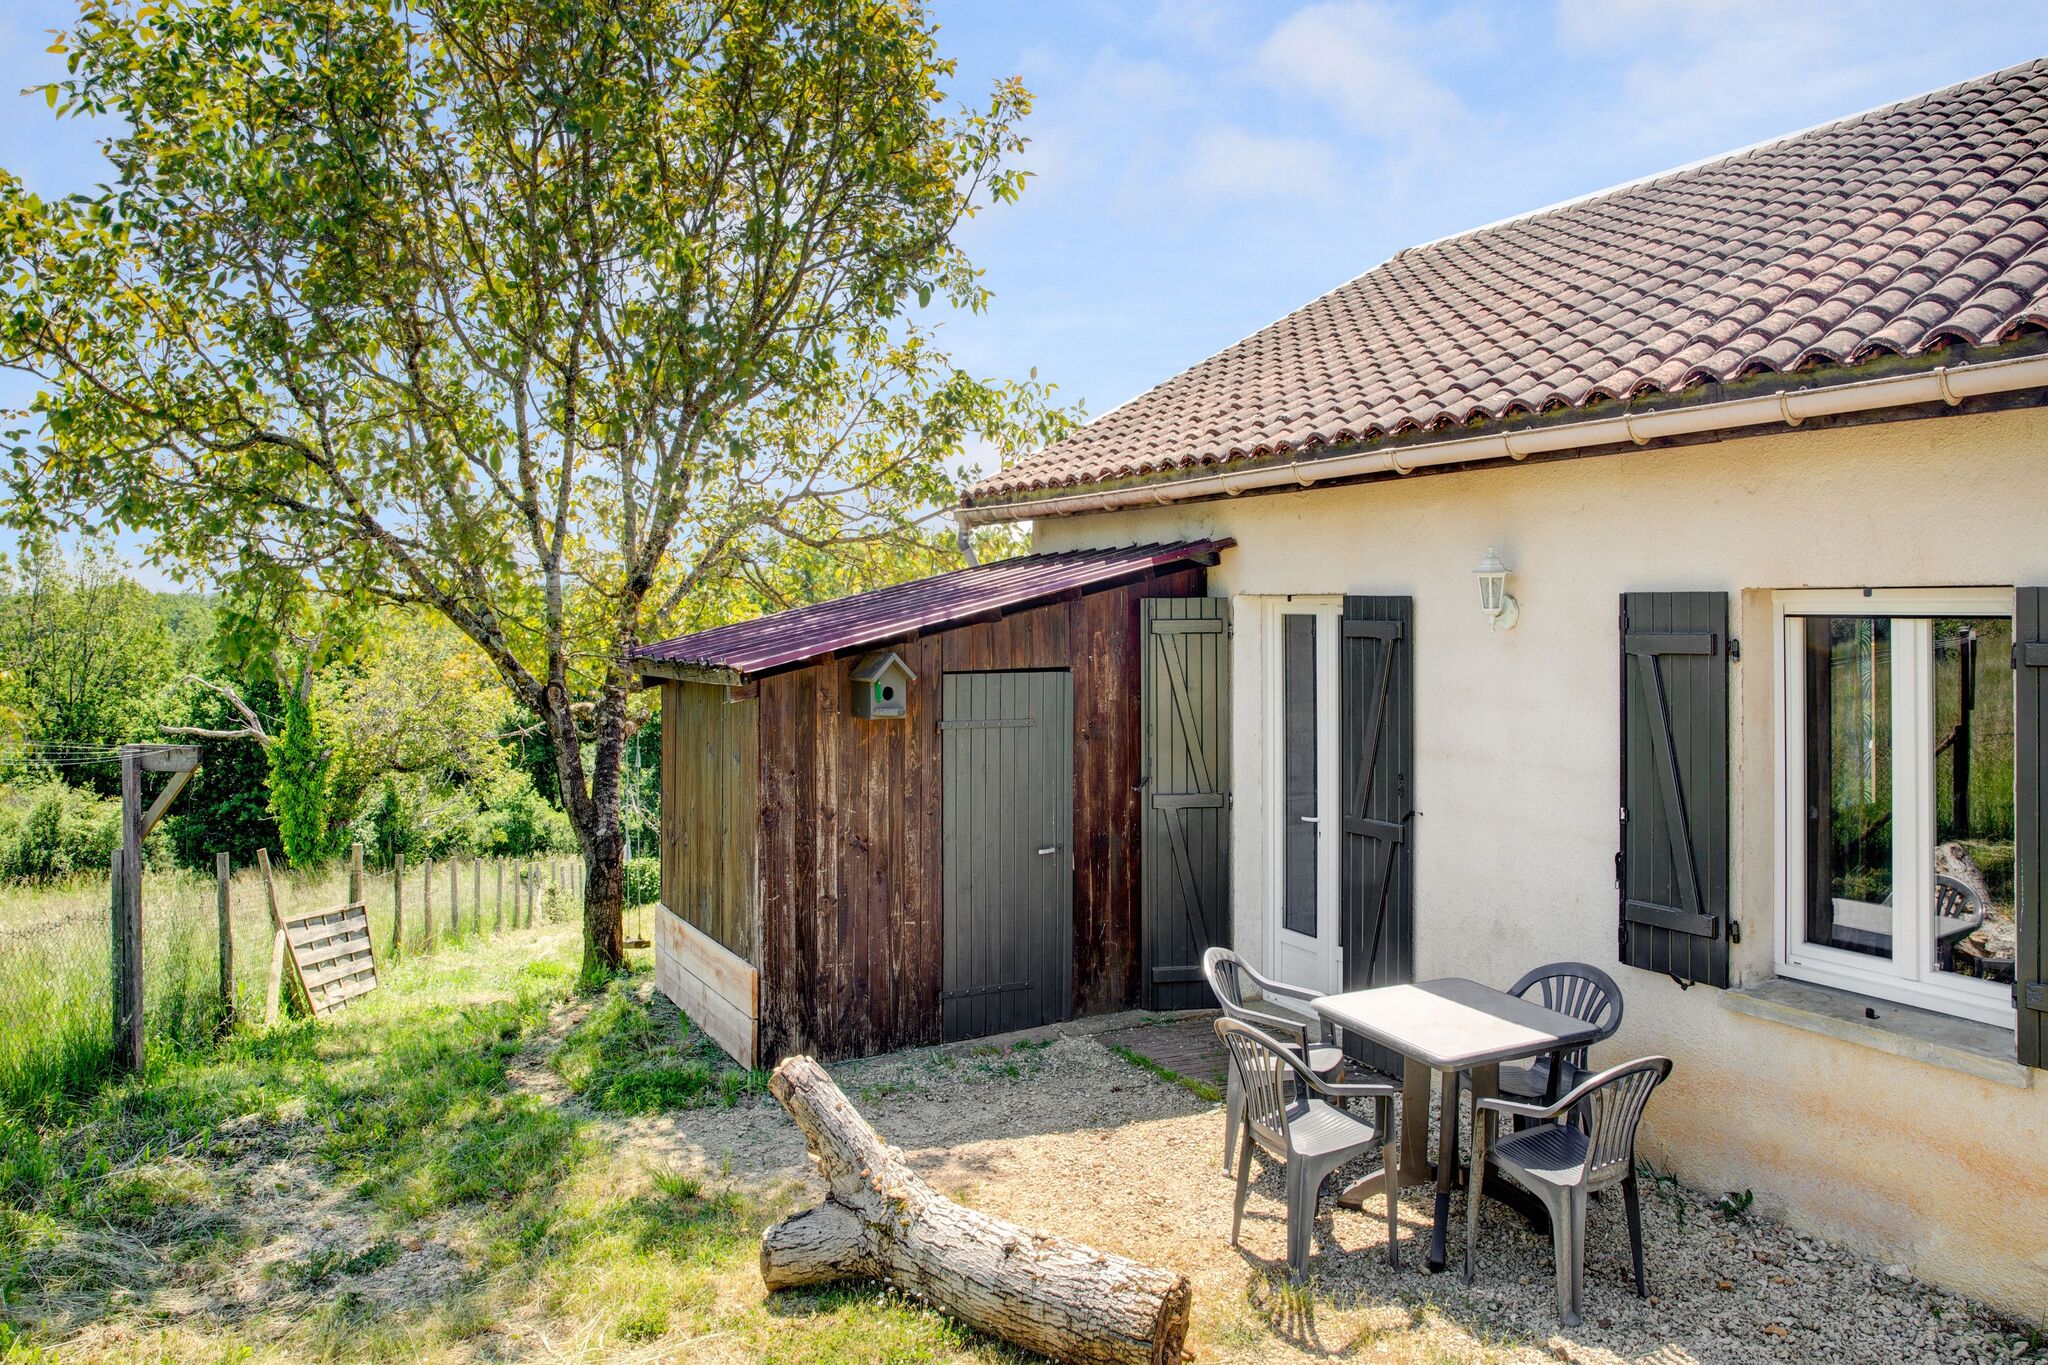 Garden-view Cottage in Tourtoirac for nature lovers